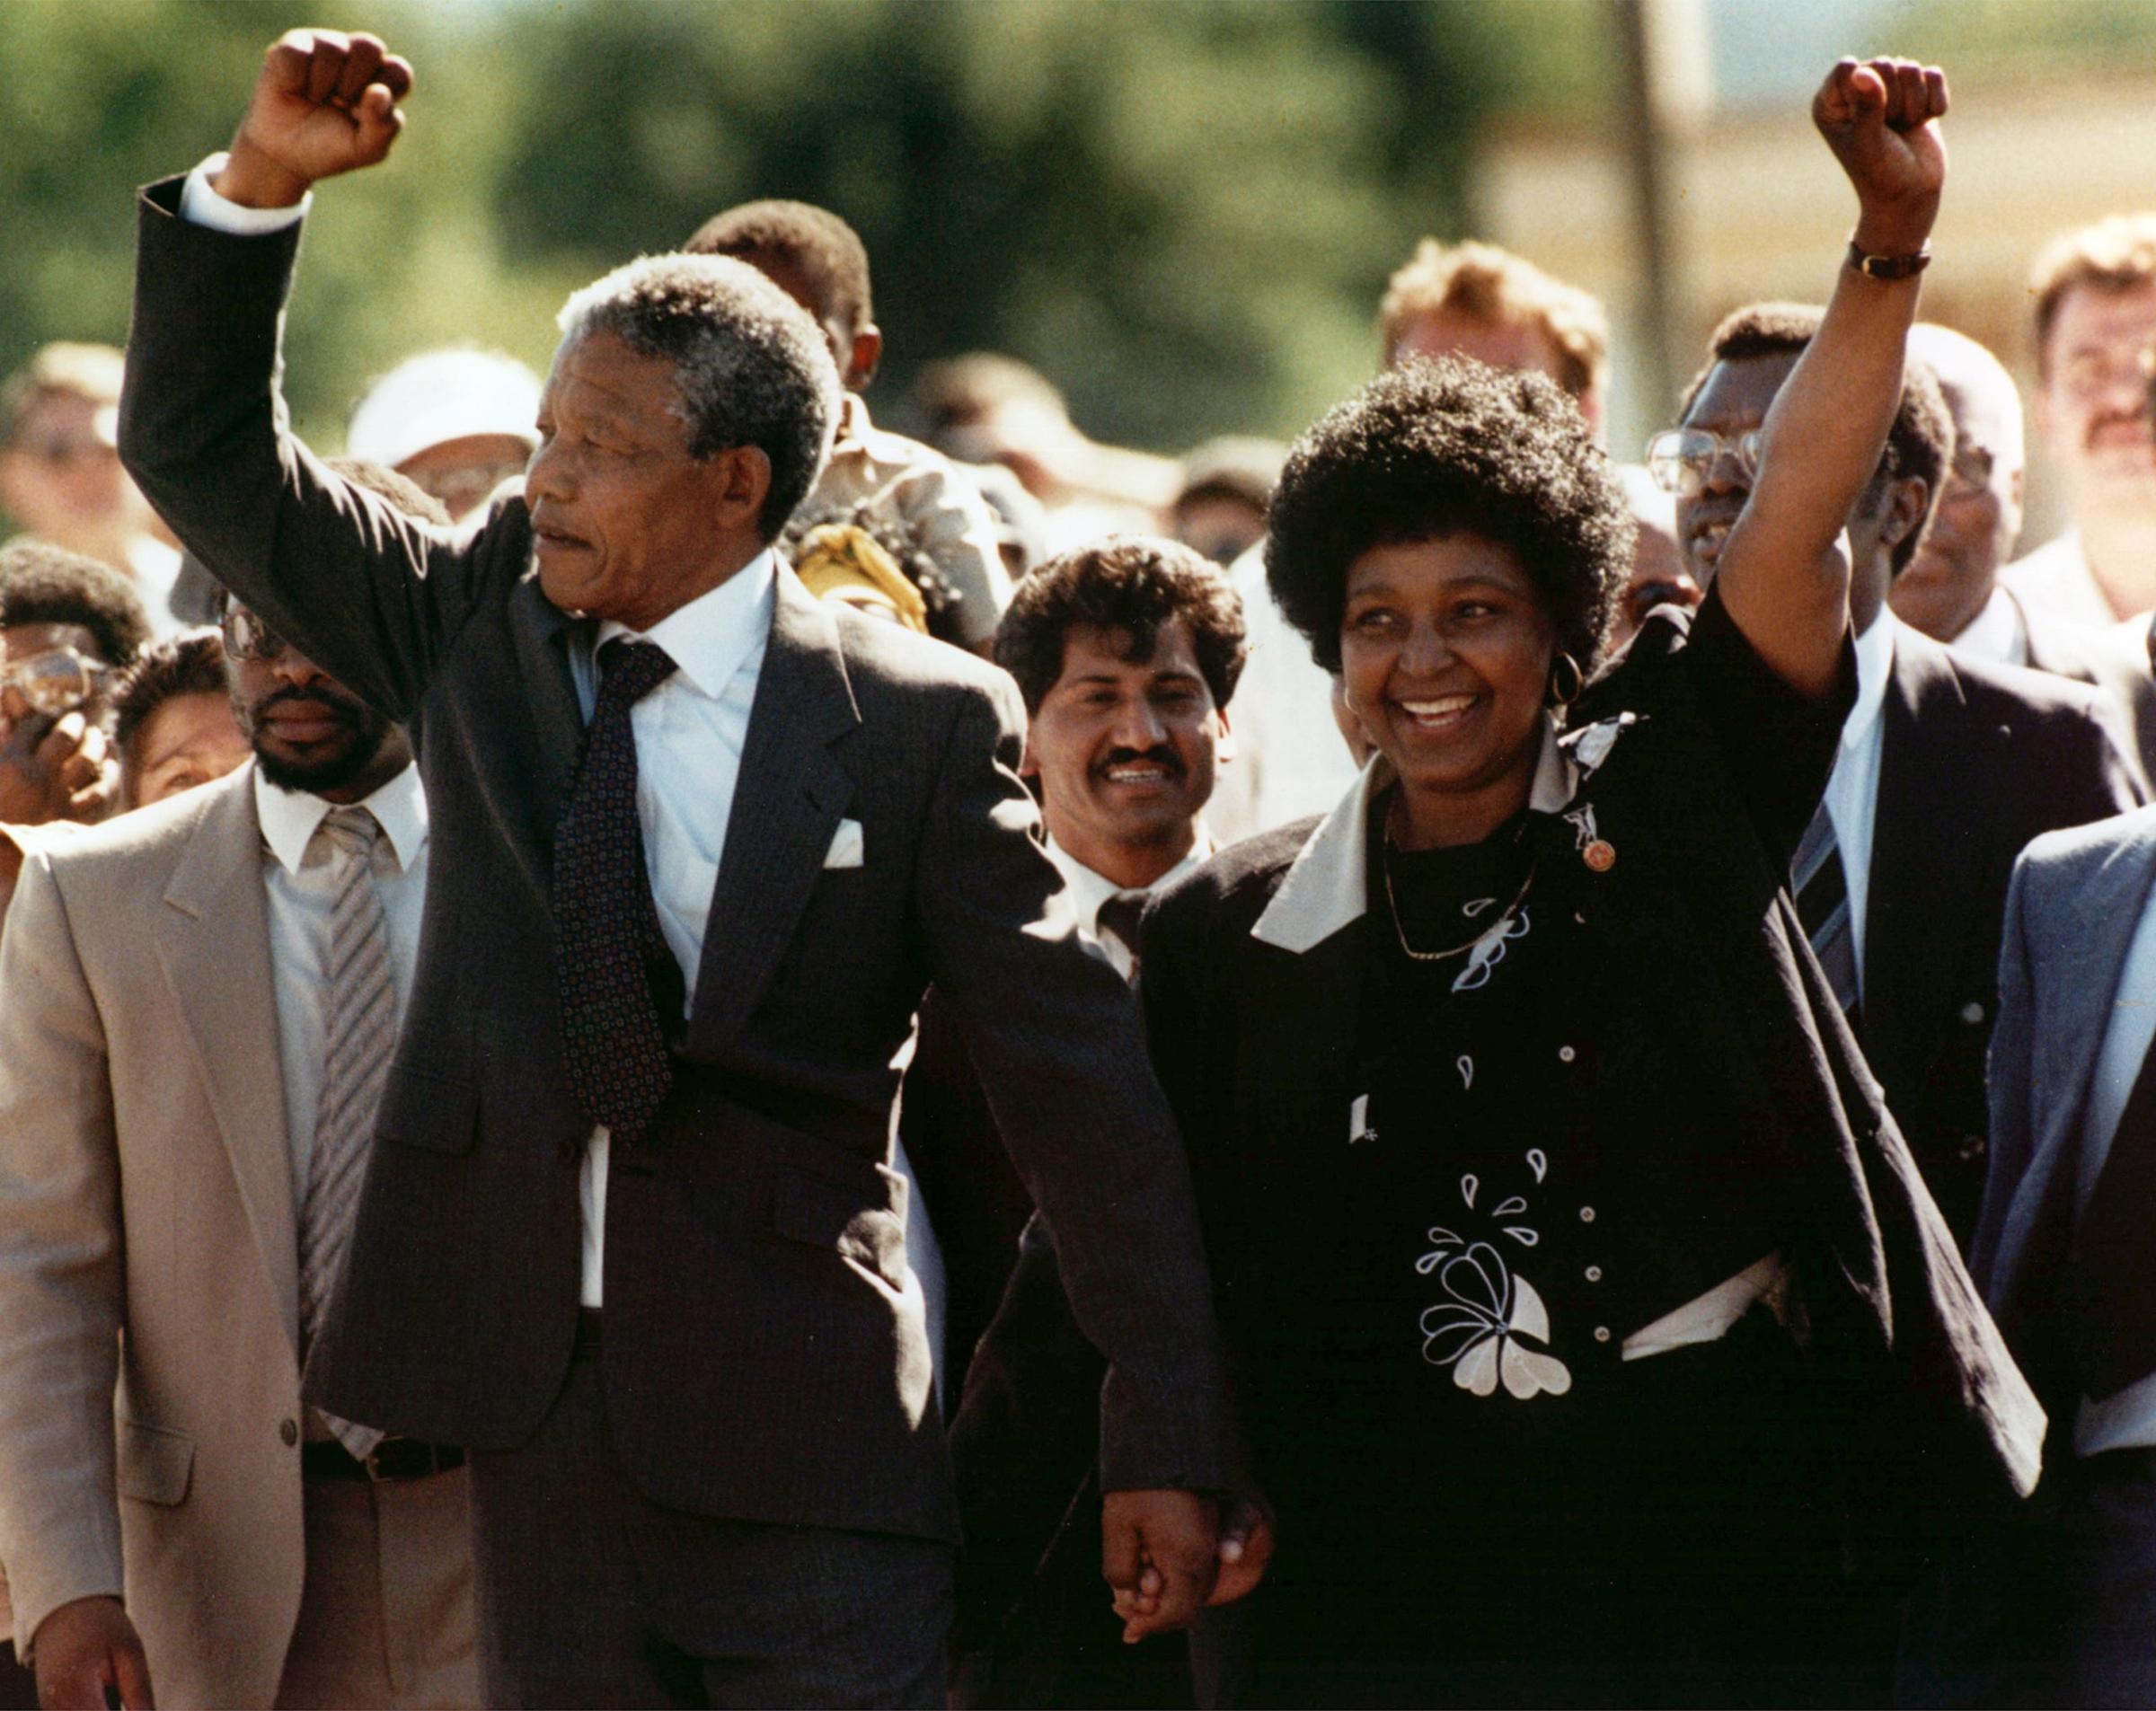 Nelson Mandela and wife Winnie, walking hand in hand, raise clenched fists upon his release from Victor prison in Cape Town on Feb. 11, 1990.